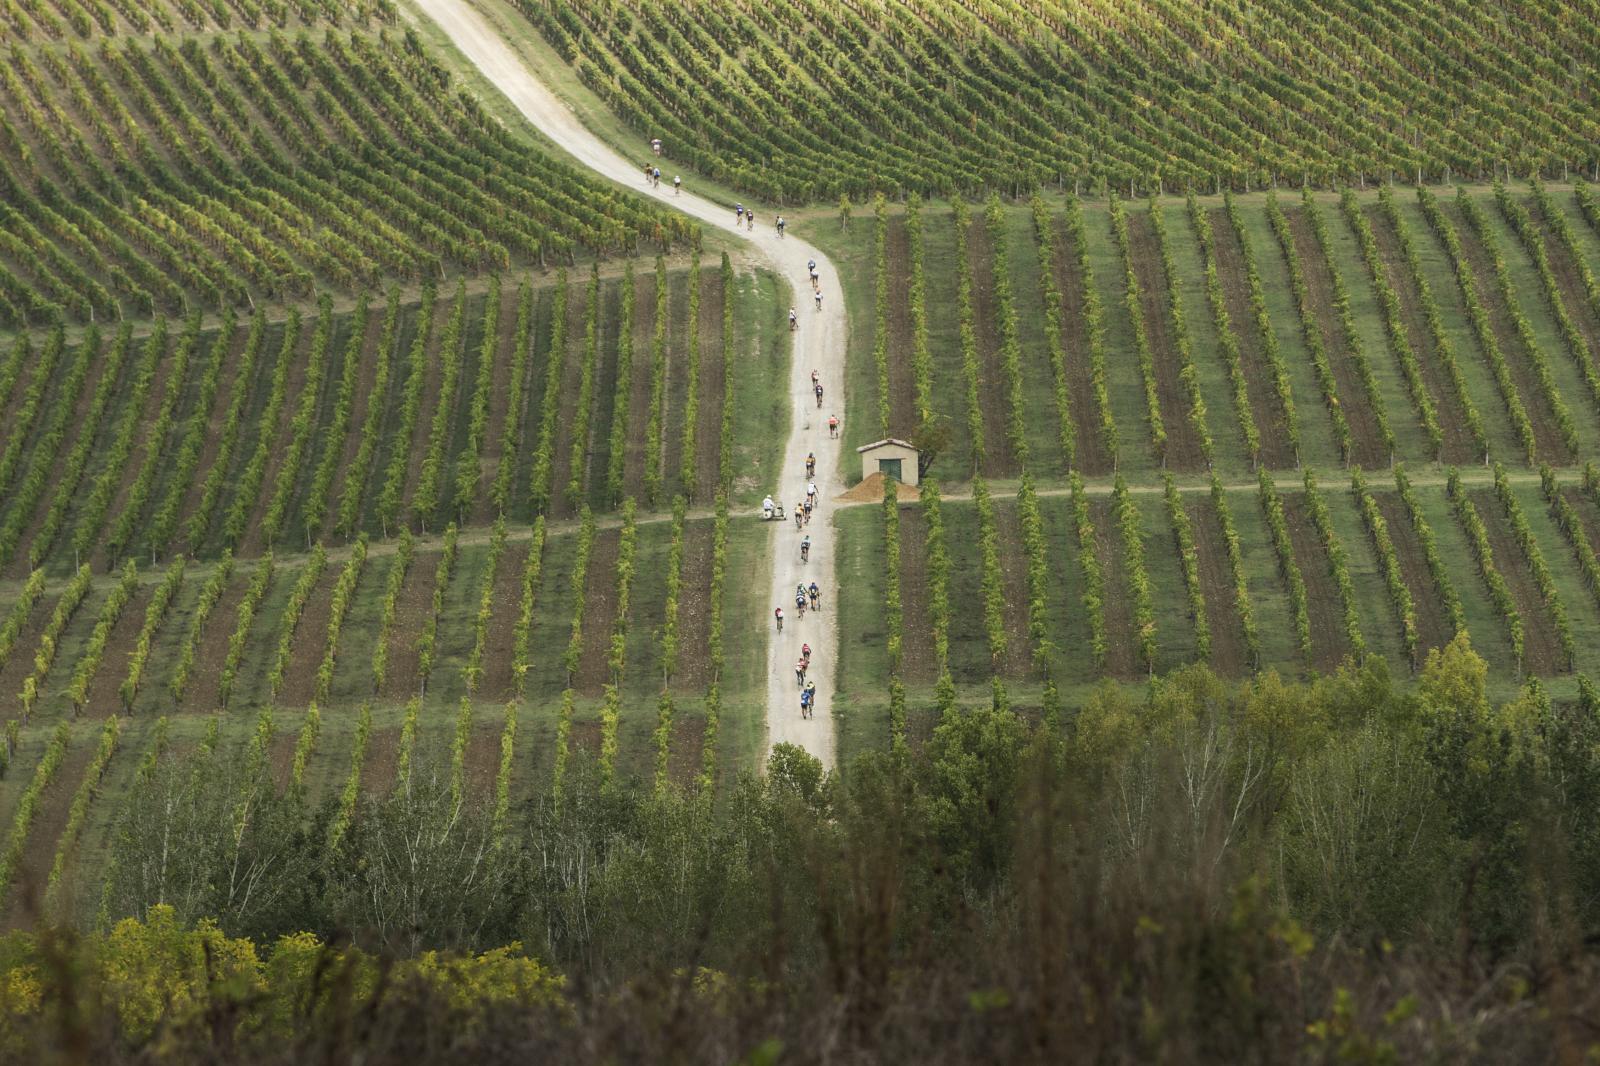 Rough road and vineyards